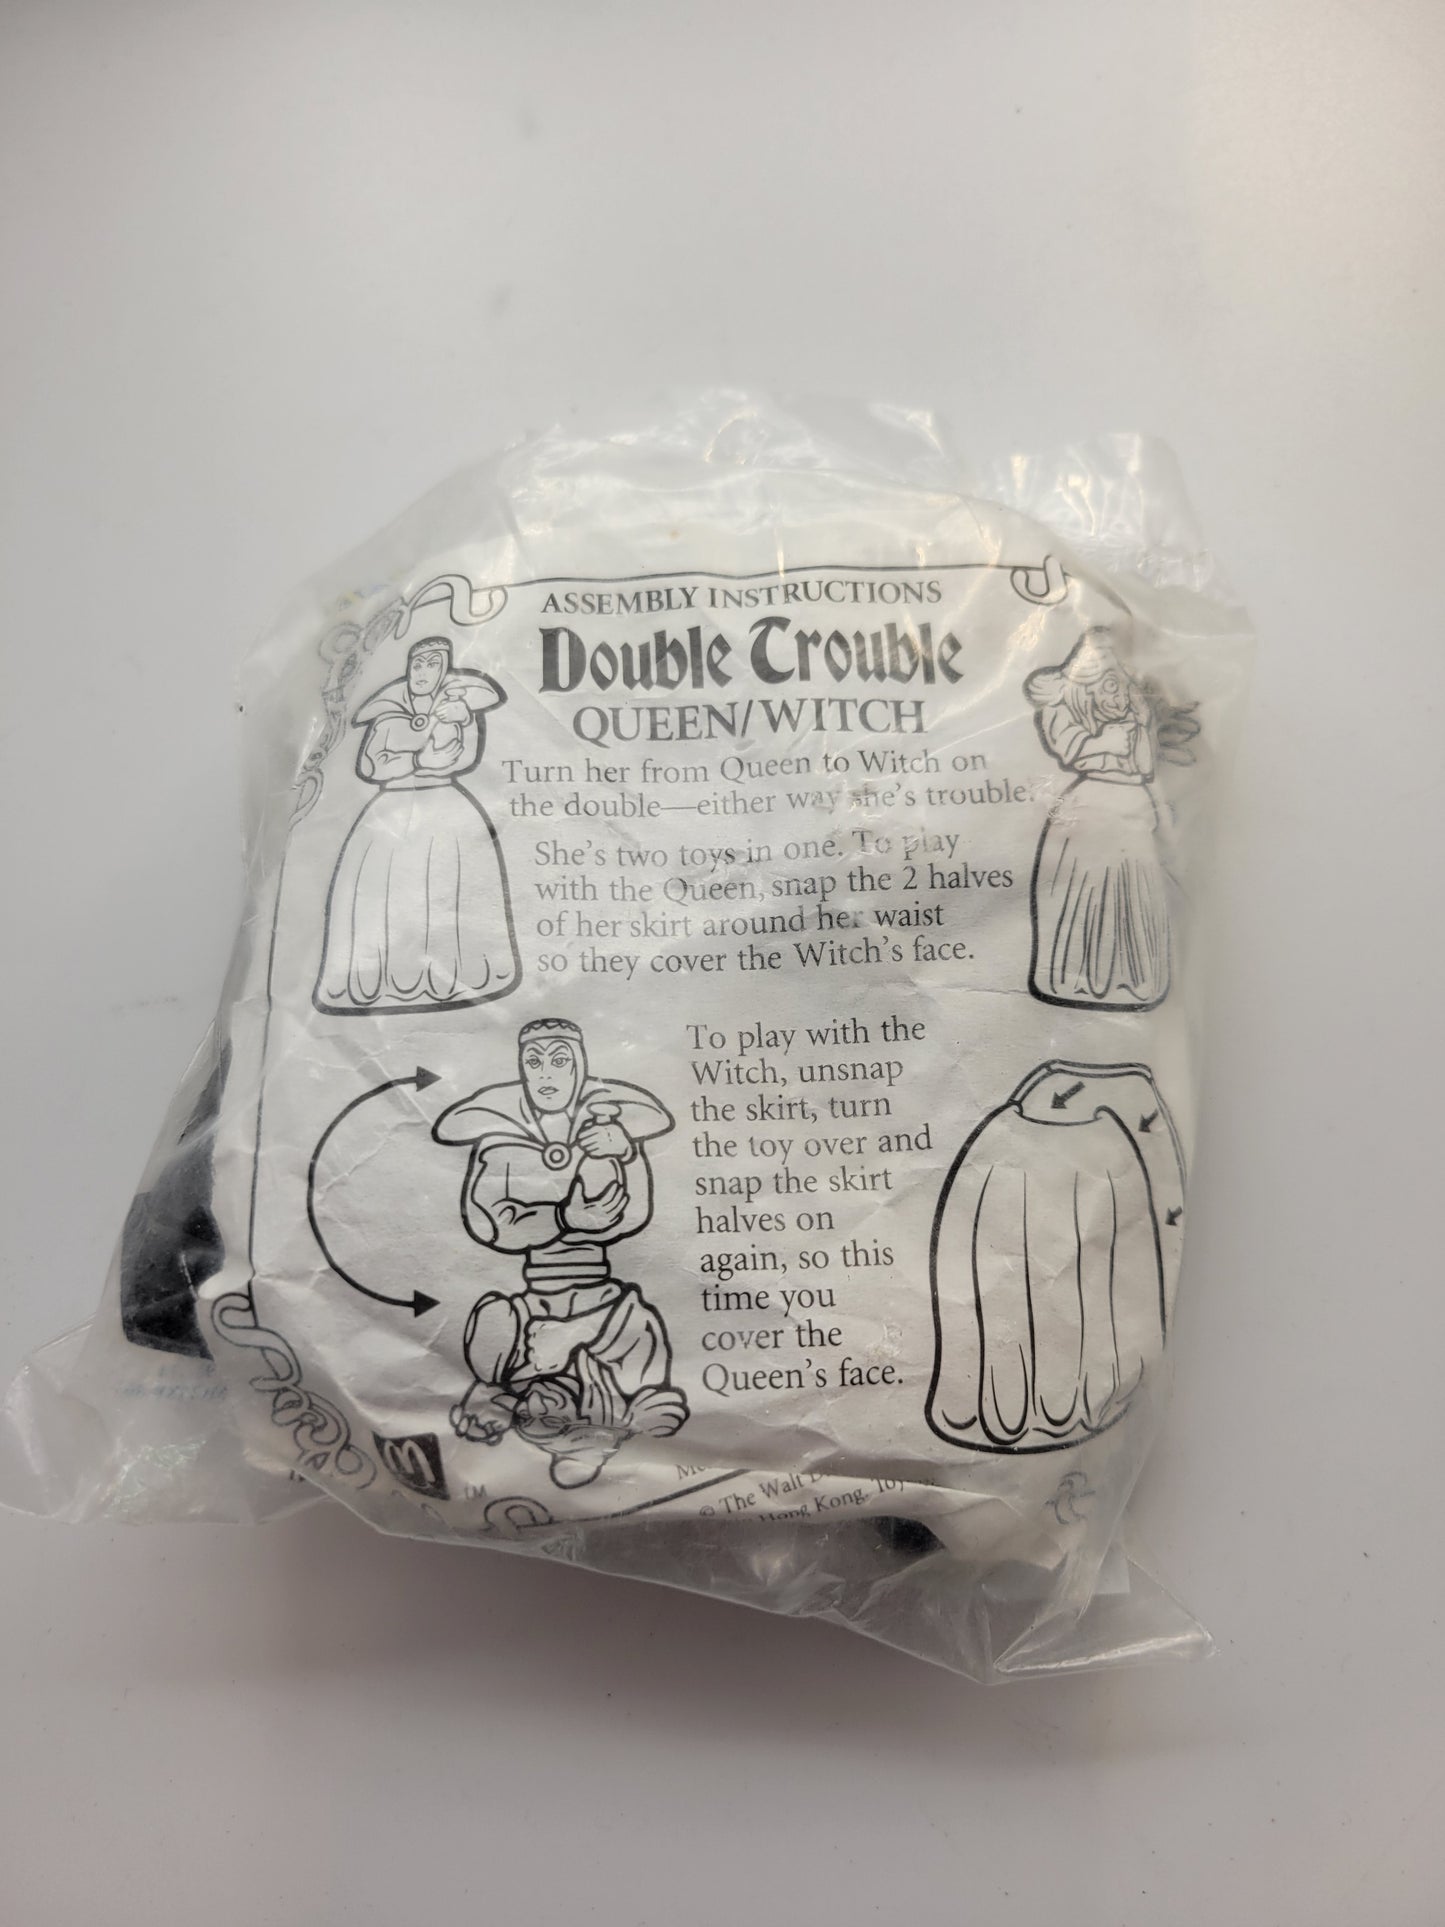 McDonald's 1992 Disney Snow White and the Seven Dwarfs Double Trouble Queen/Witch Happy Meal Toy